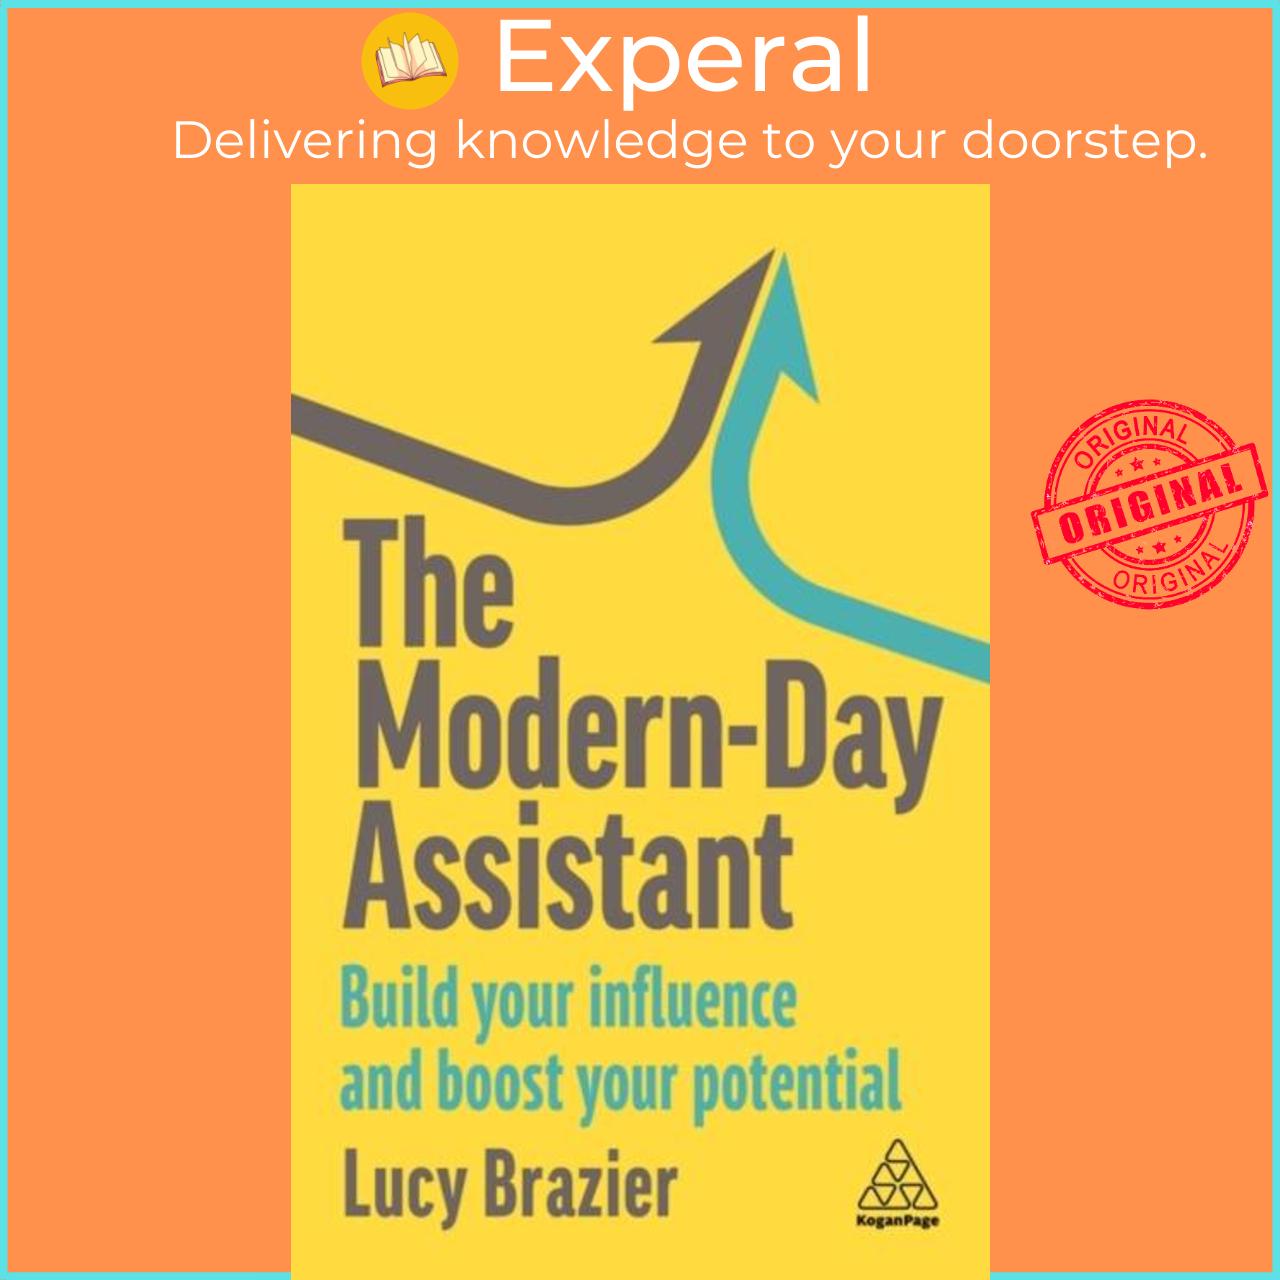 Sách - The Modern-Day Assistant - Build Your Influence and Boost Your Potential by Lucy Brazier (UK edition, paperback)